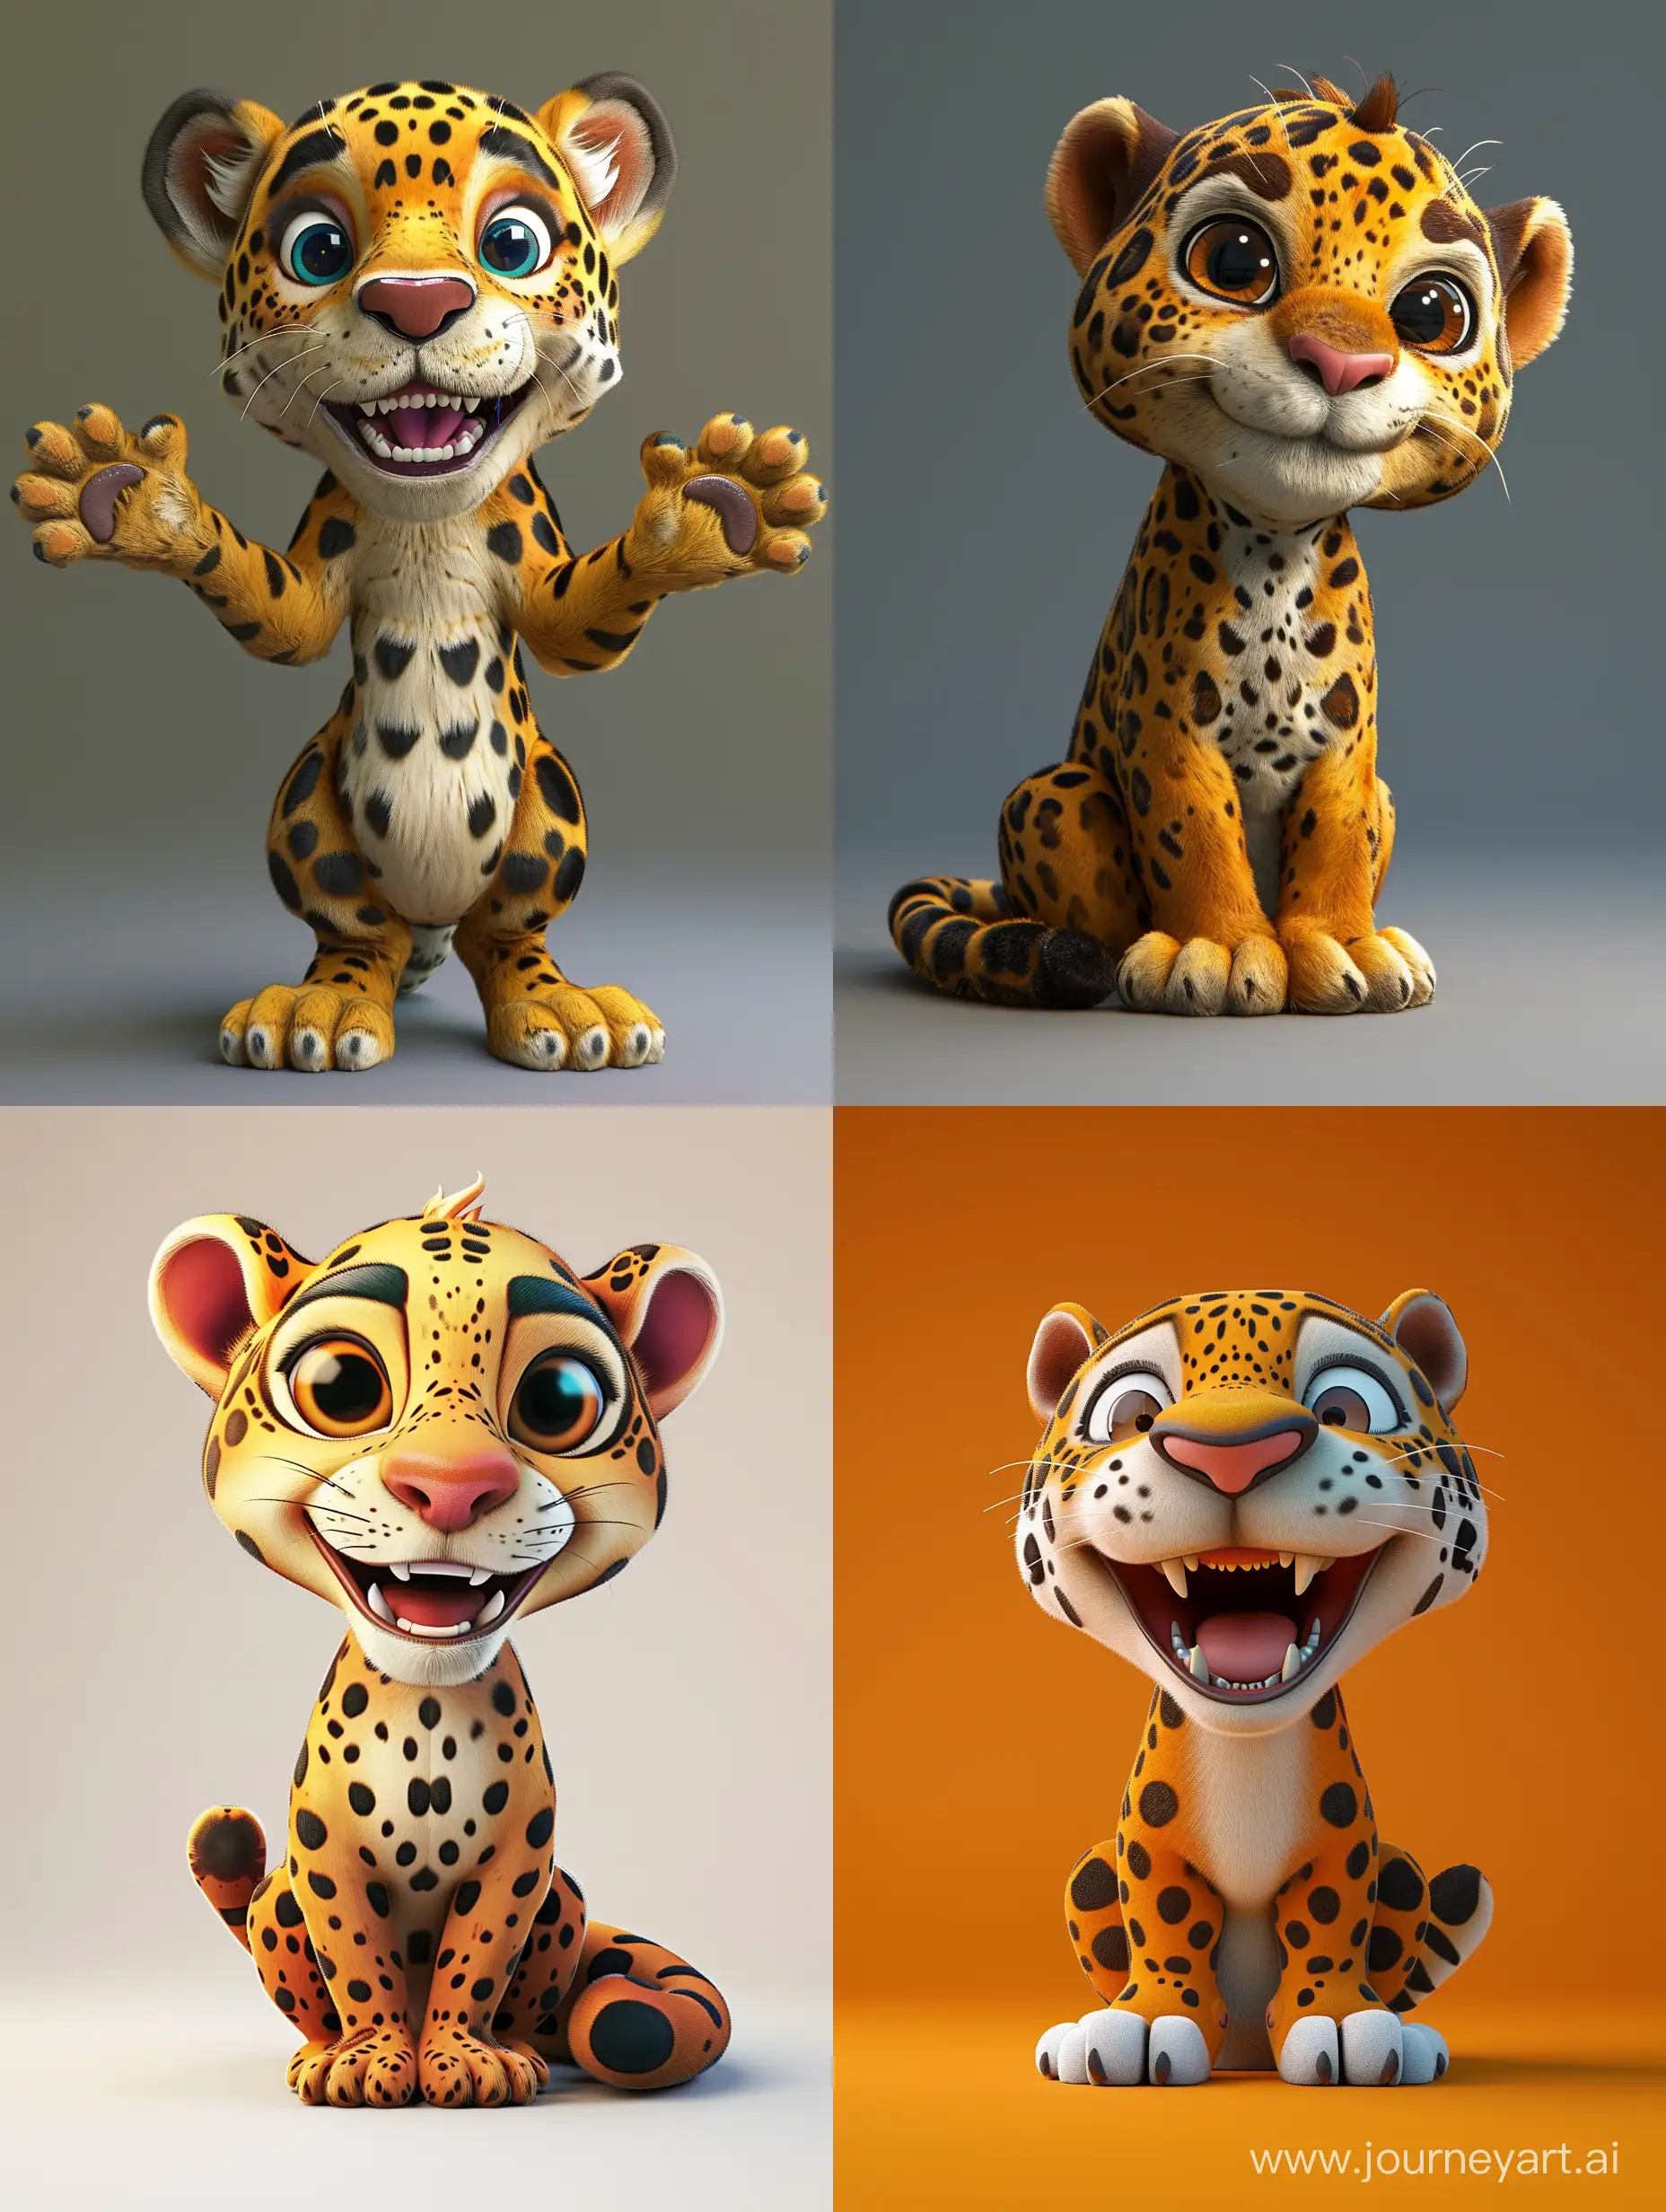 Cheerful-PixarStyle-Jaguar-for-Mascot-Proposals